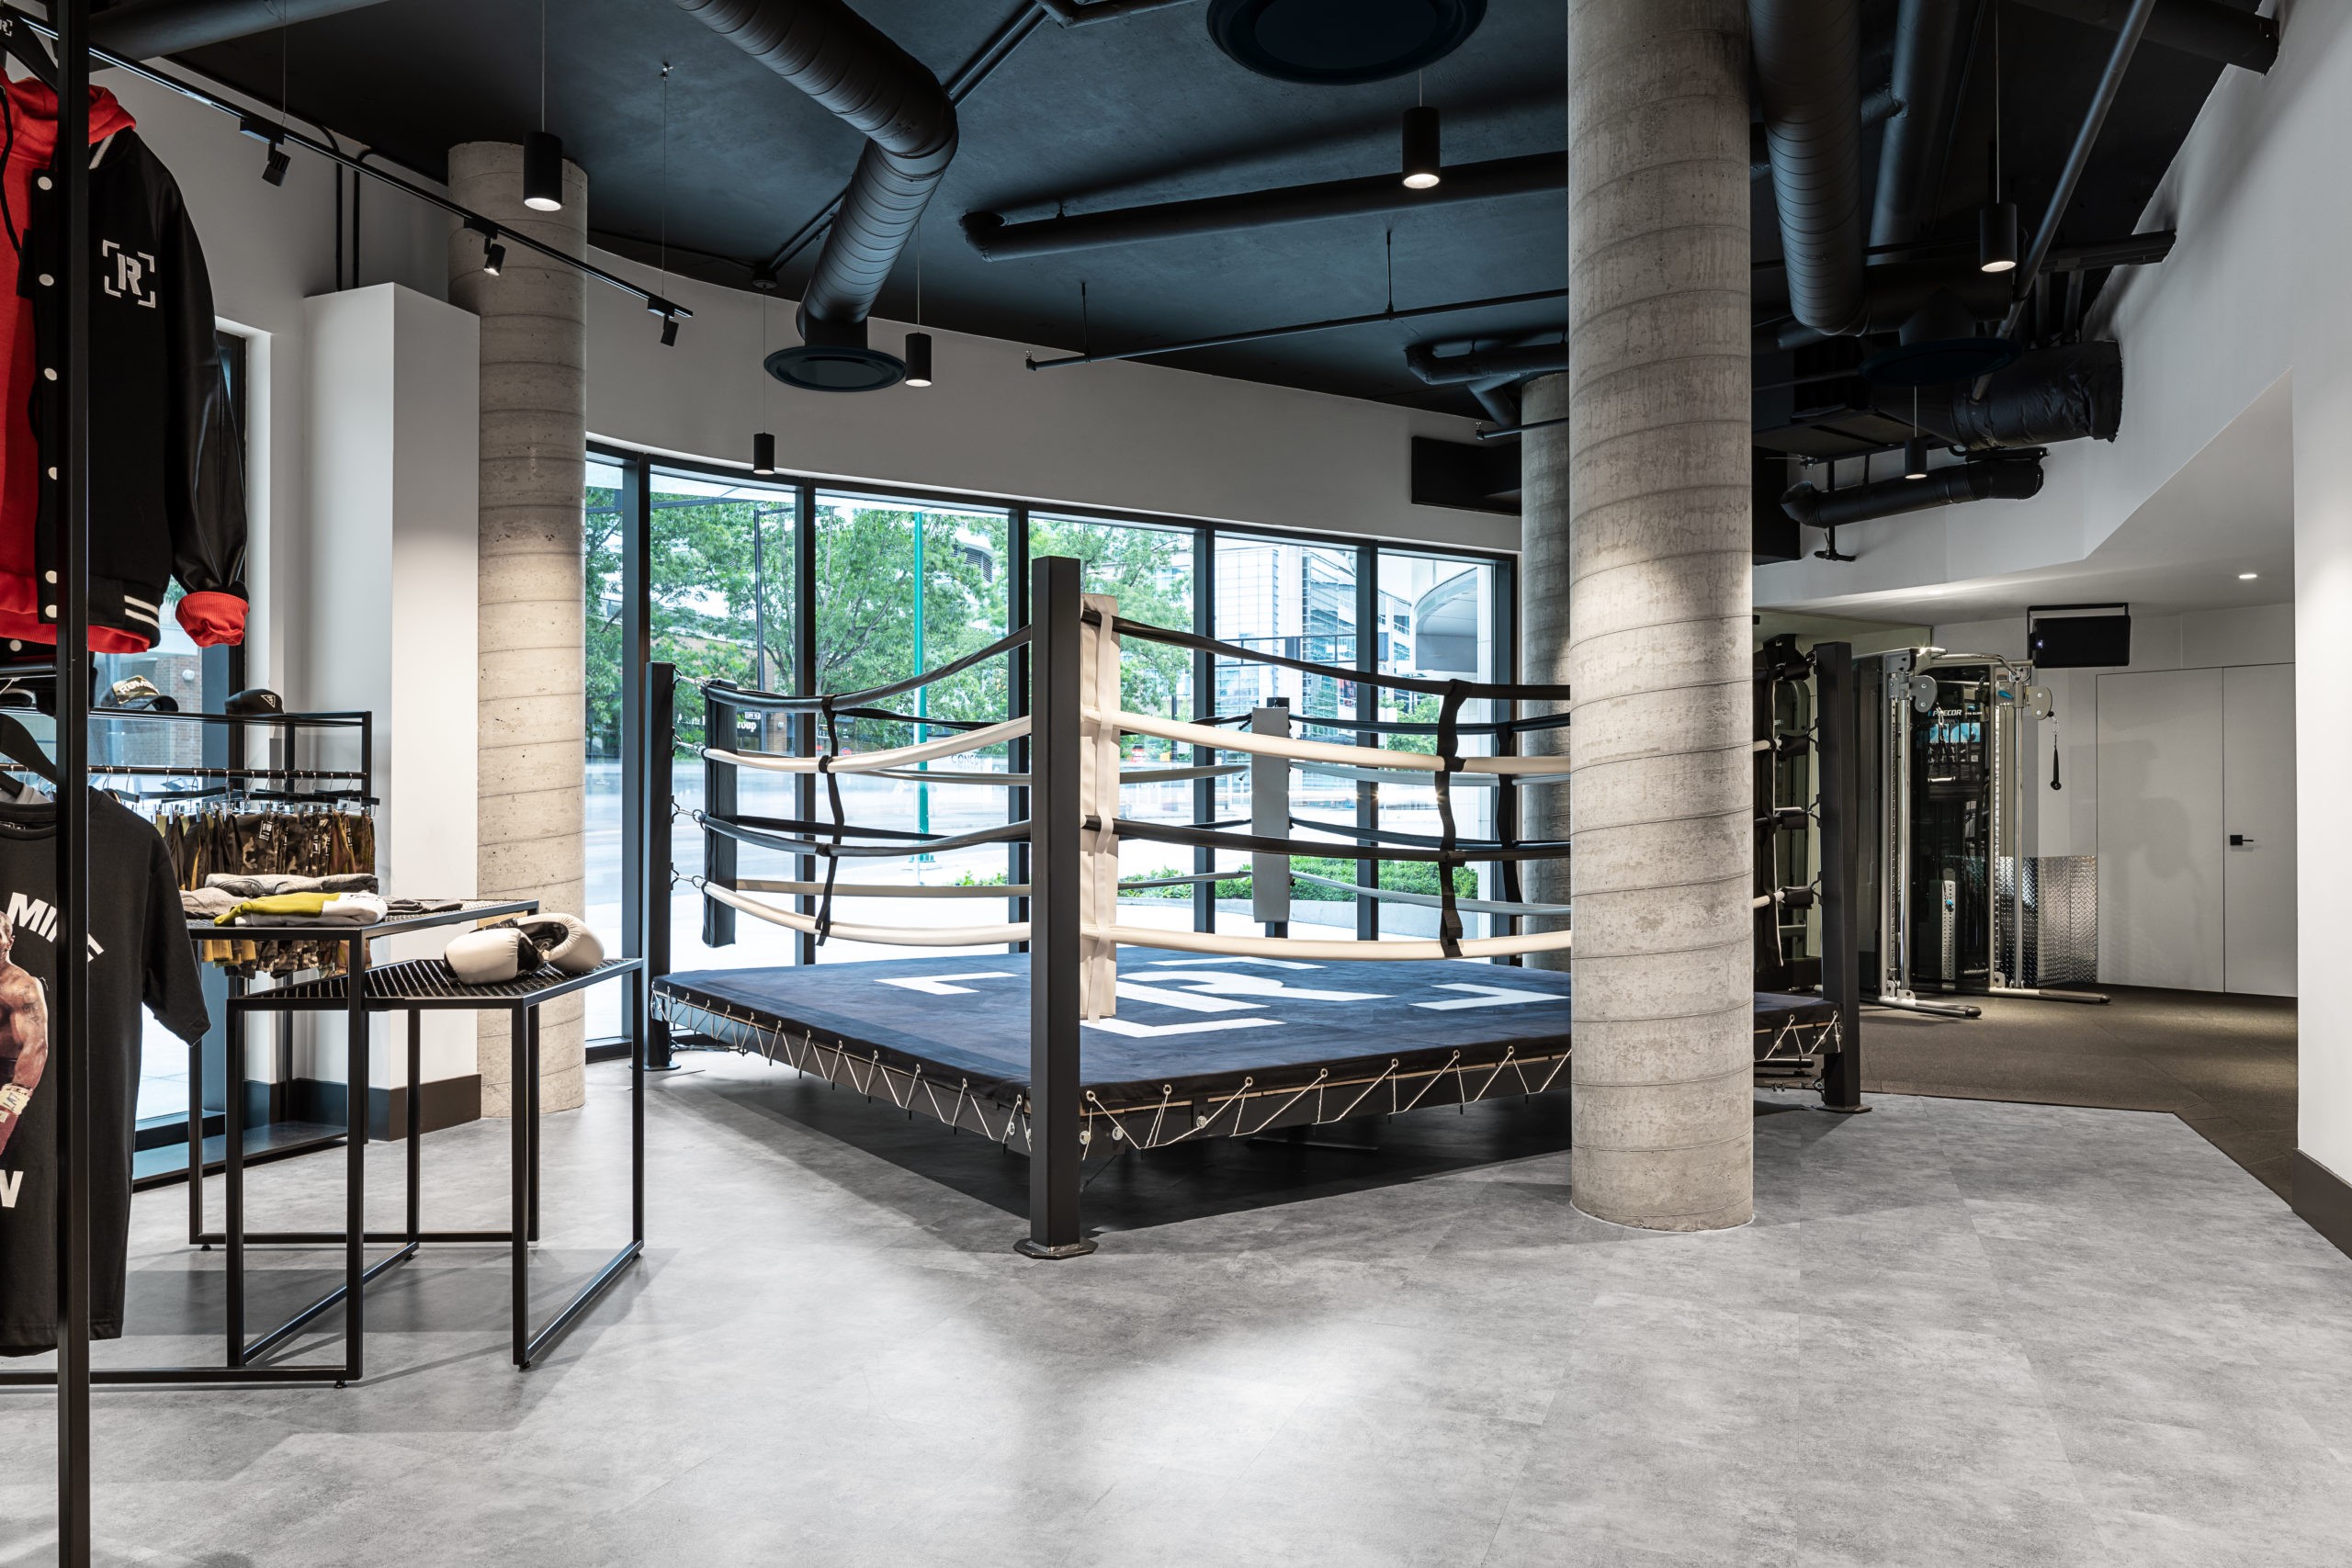 Boxing ring design and interior, Fitness & Gym Design, Rumble Boxing Studio in Vancouver  BC, by Cutler